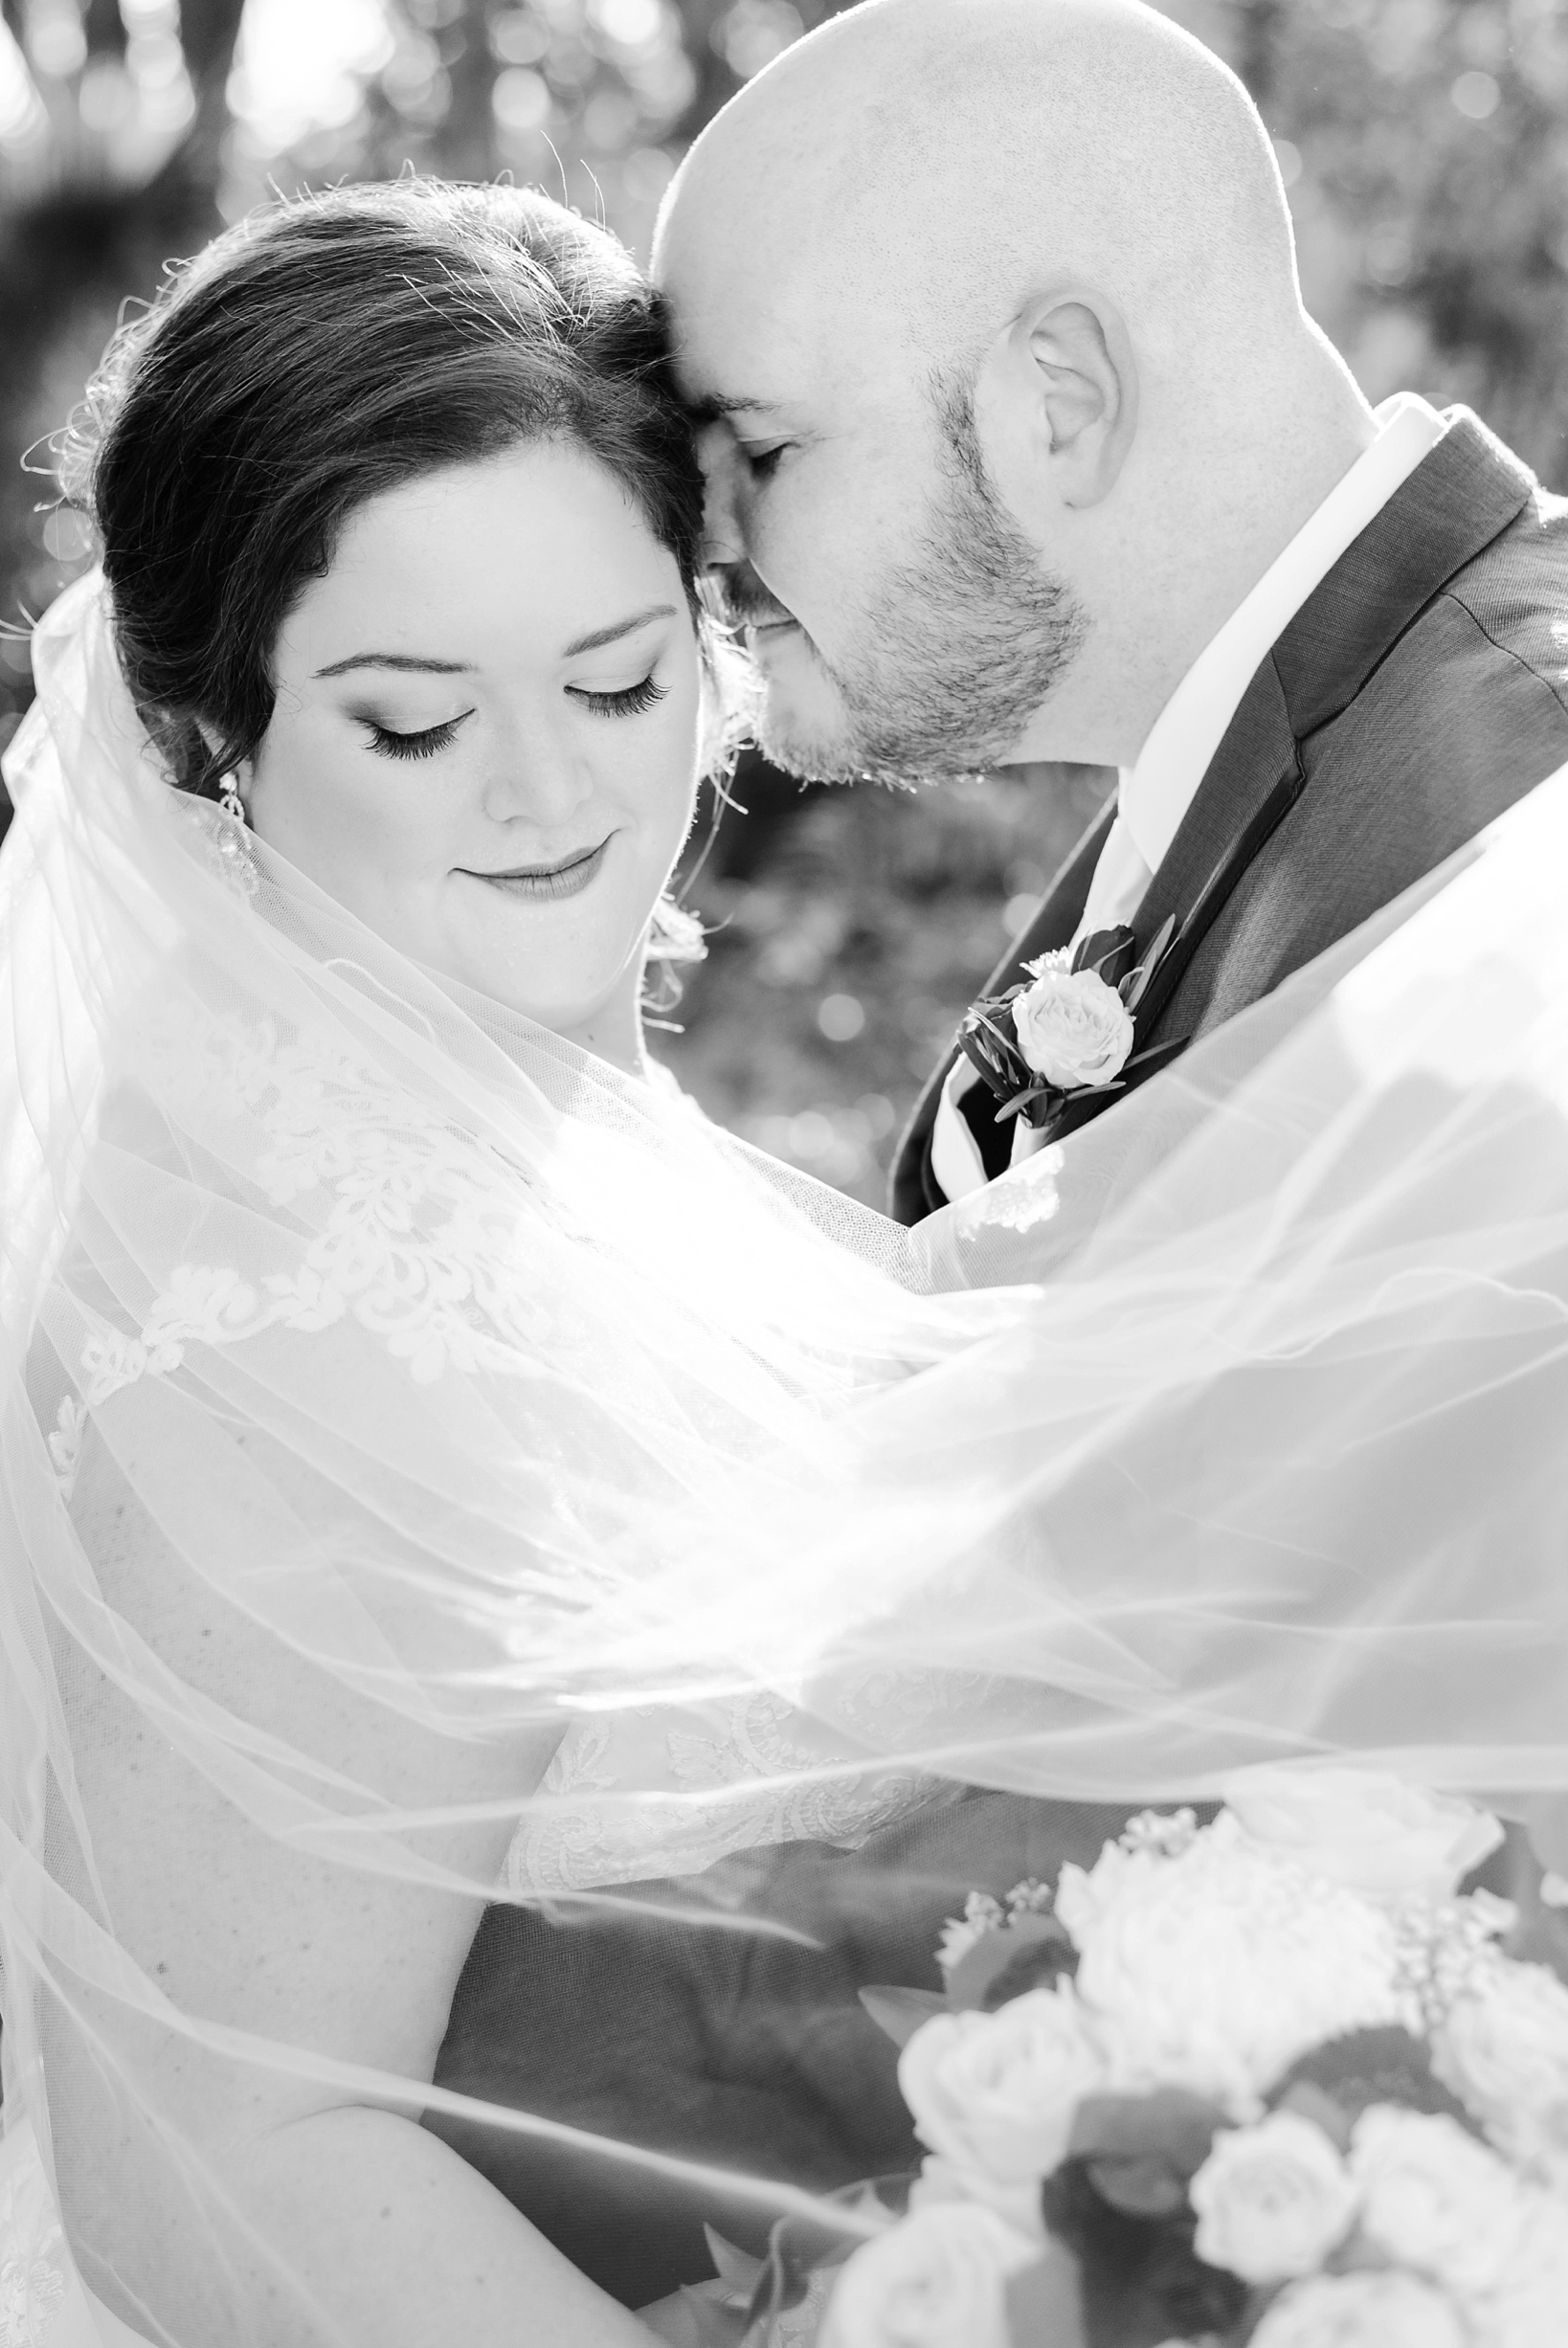 Black and White wedding photo with veil blowing in the wind